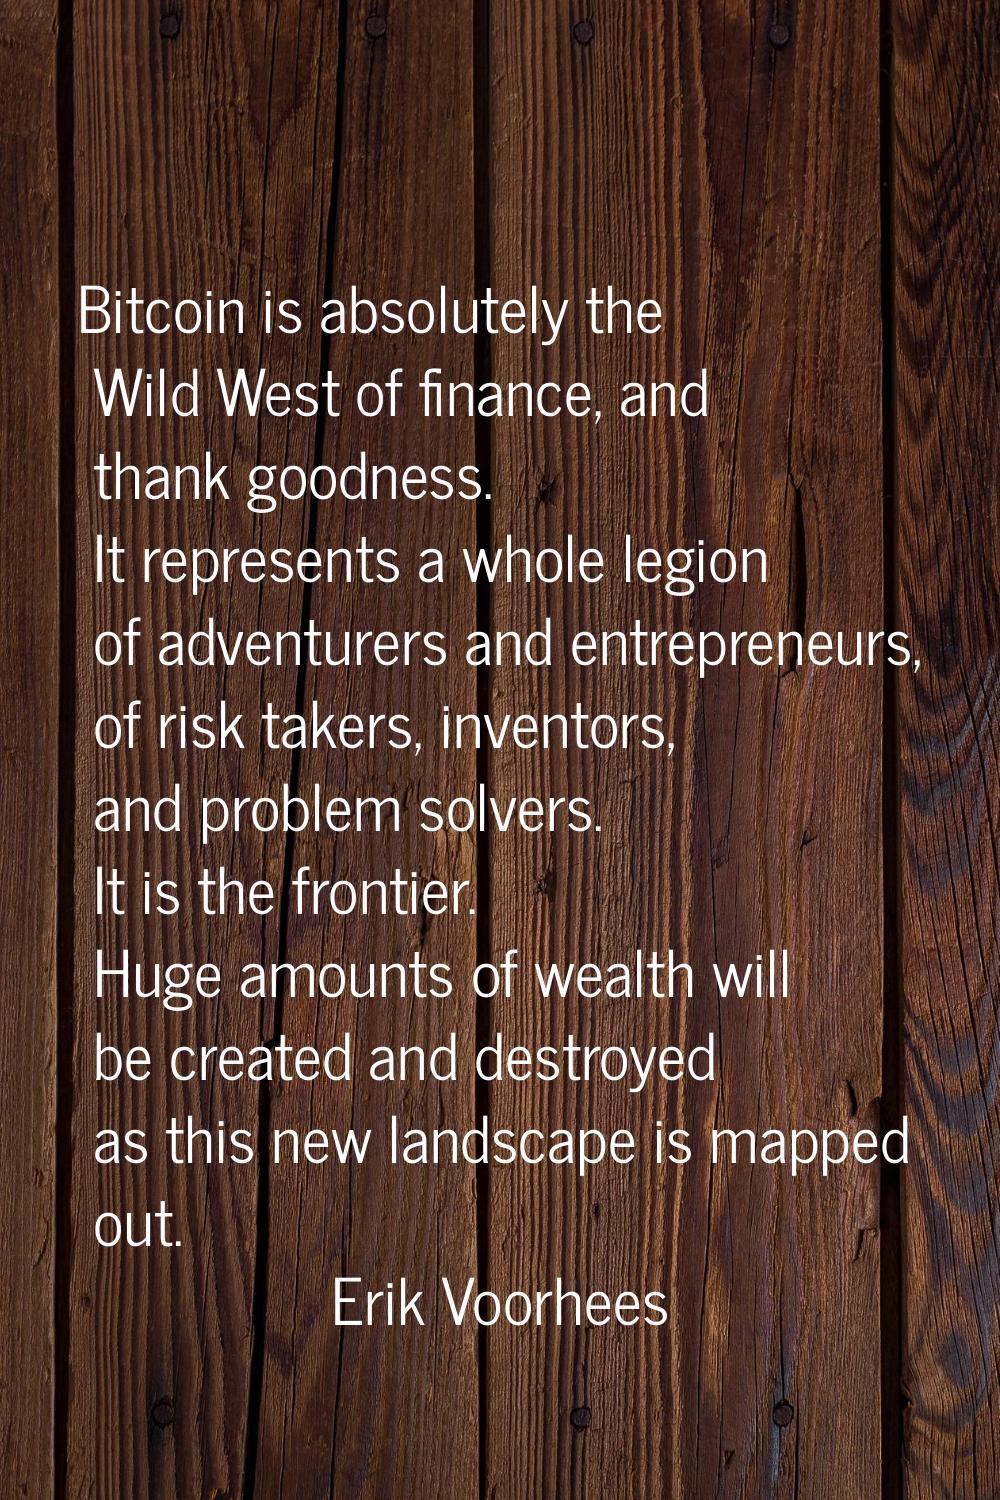 Bitcoin is absolutely the Wild West of finance, and thank goodness. It represents a whole legion of